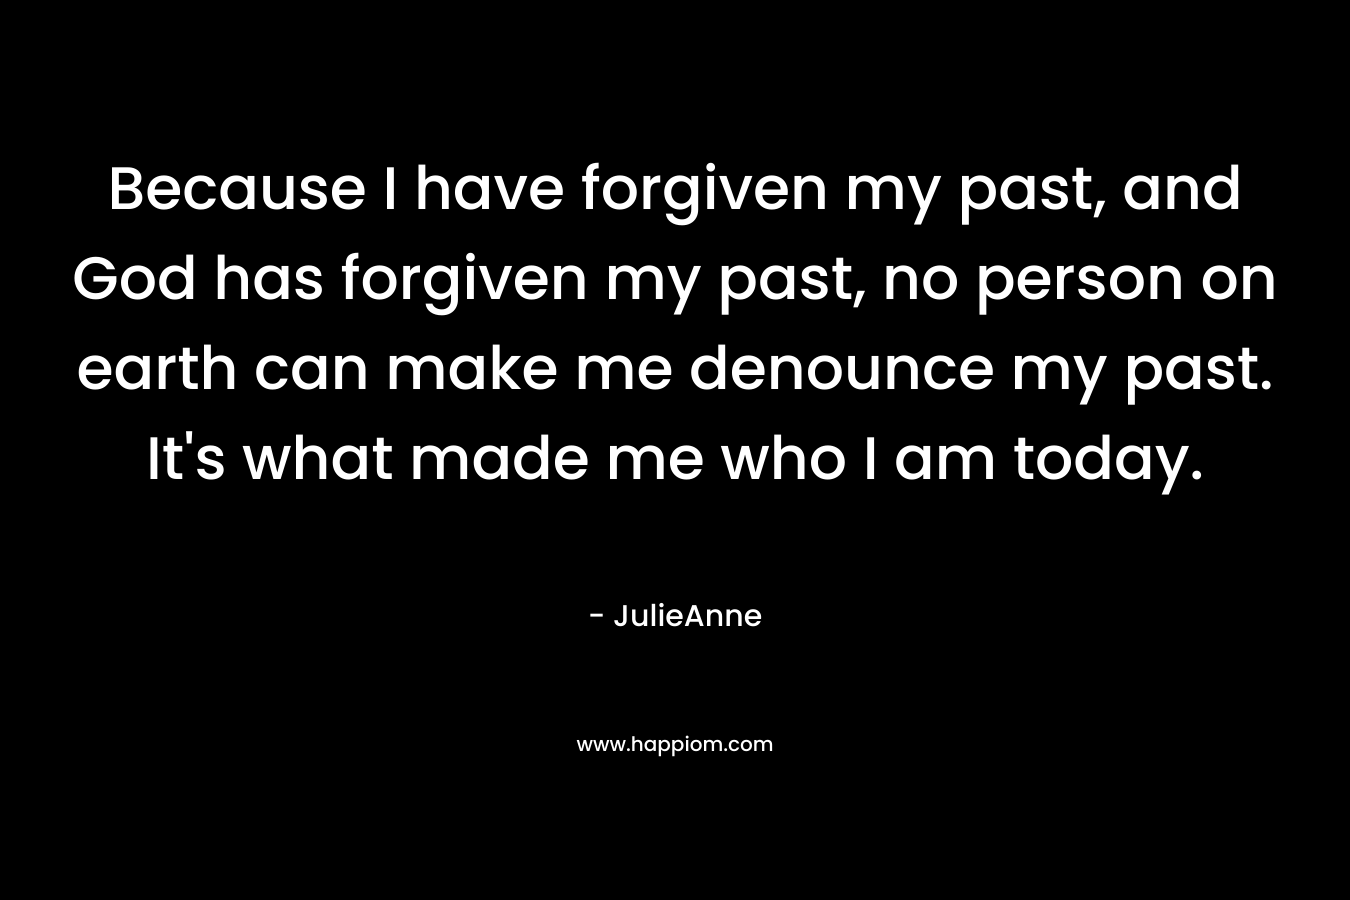 Because I have forgiven my past, and God has forgiven my past, no person on earth can make me denounce my past. It's what made me who I am today.